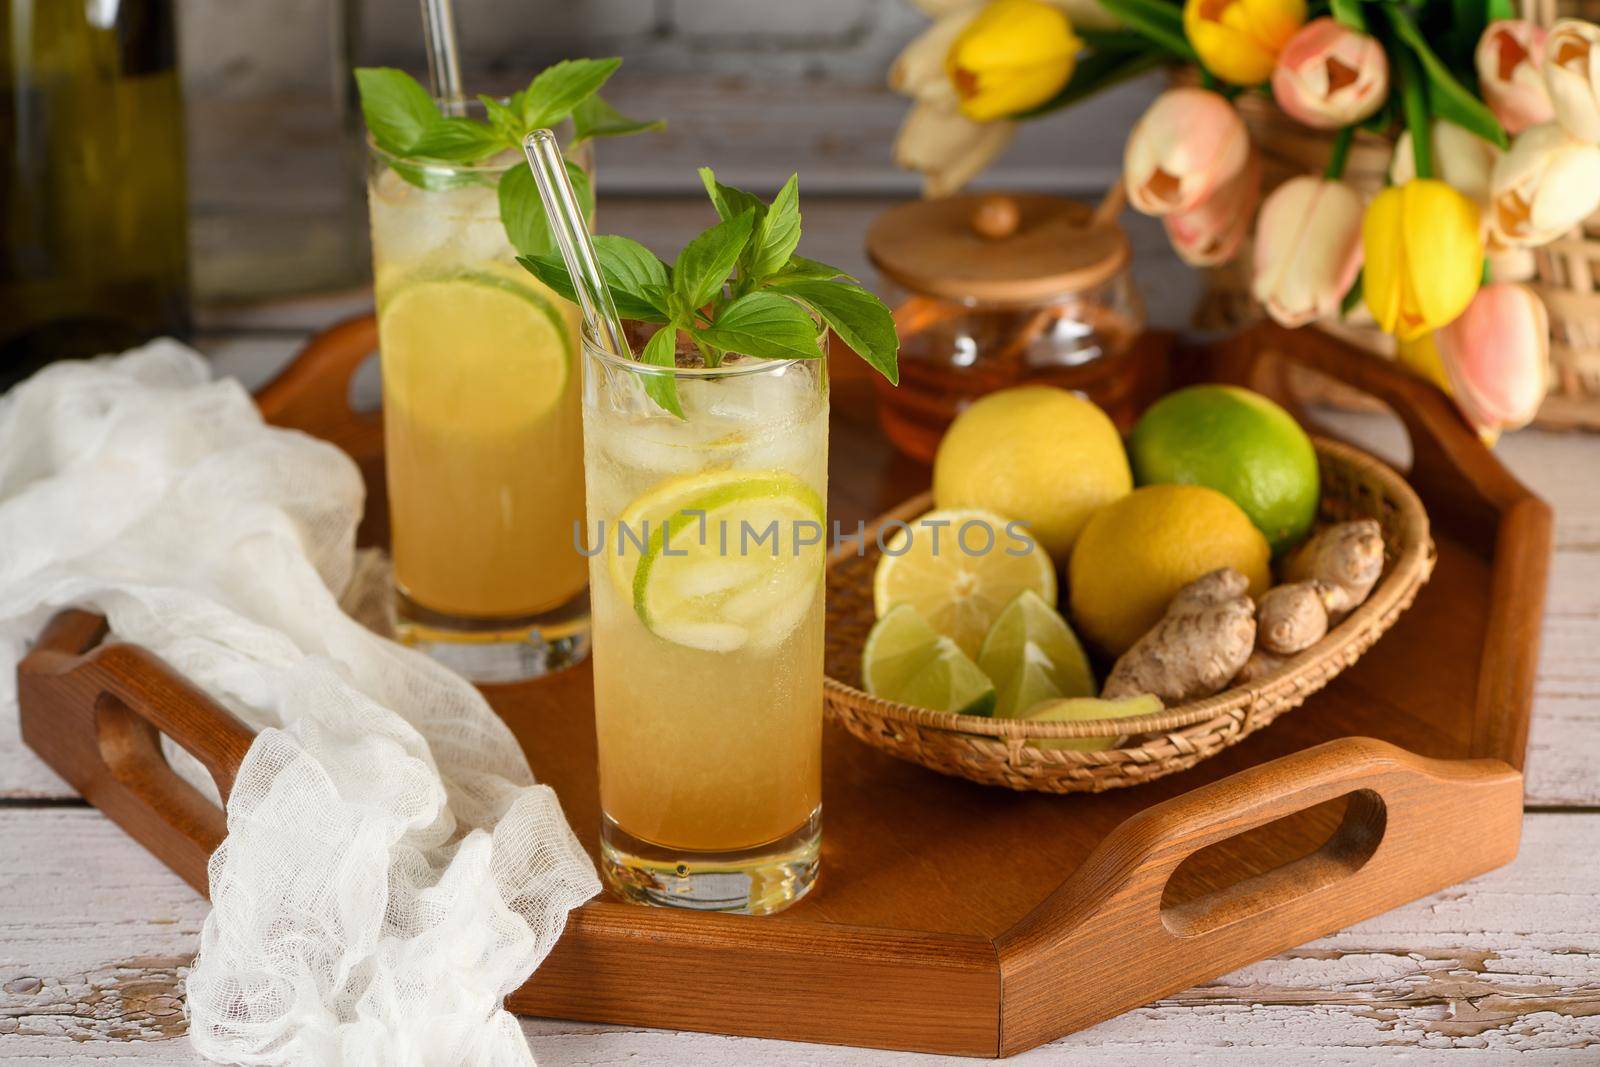 Incredible lavender lemonade. It's sweetened and flavored with homemade lavender honey syrup to make it healthier and tastier. Refreshing organic non-alcohol cocktail.